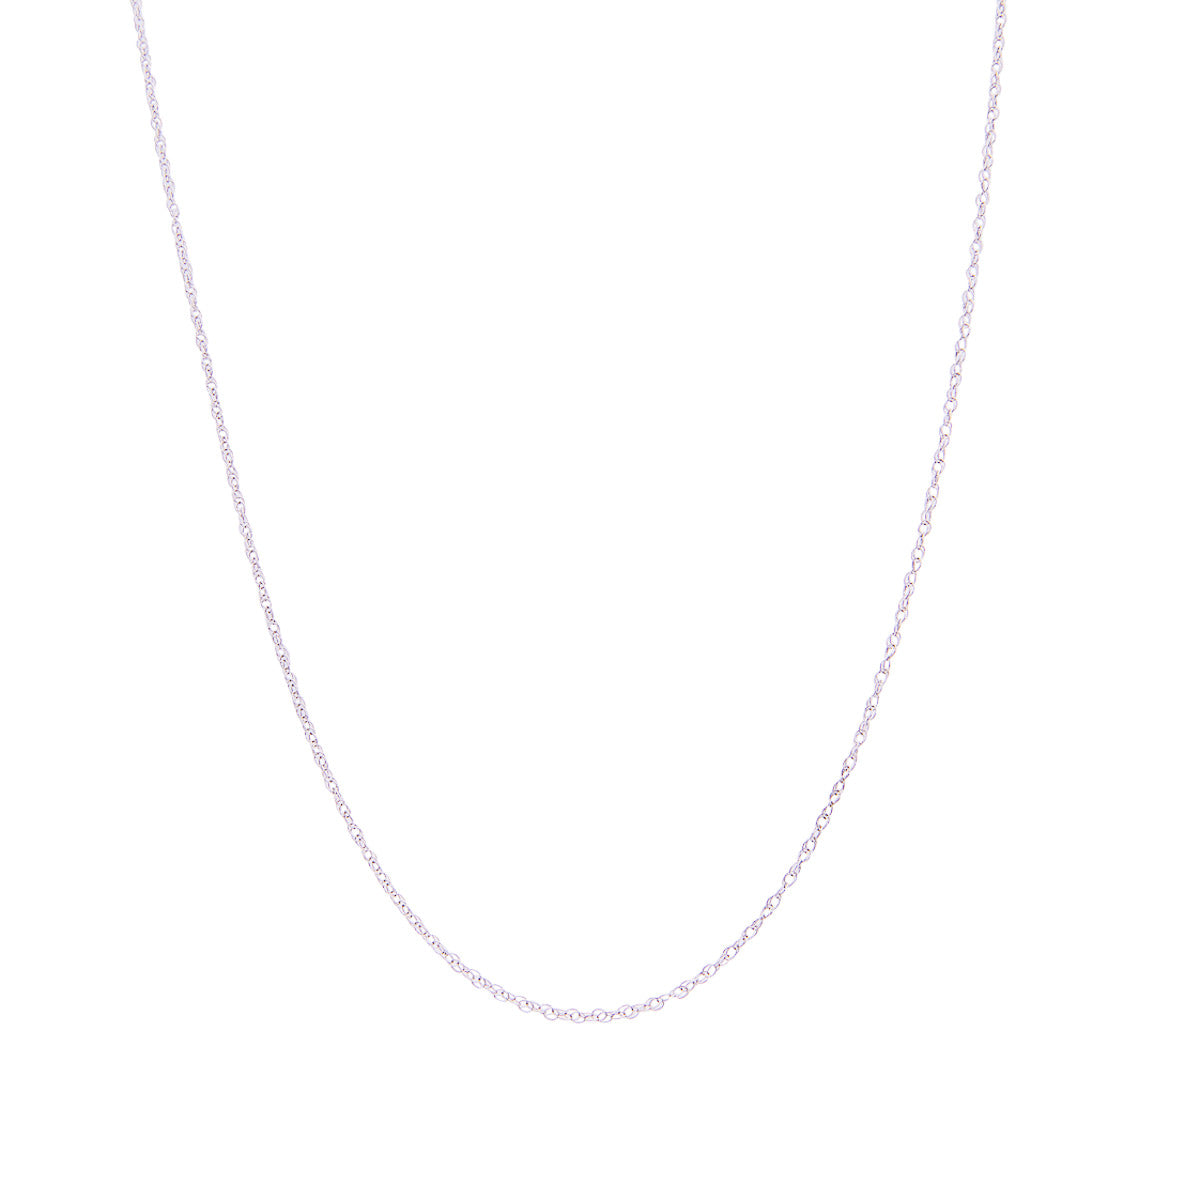 Fink's Jewelers 1.2mm Rope Chain Necklace in 14K White Gold